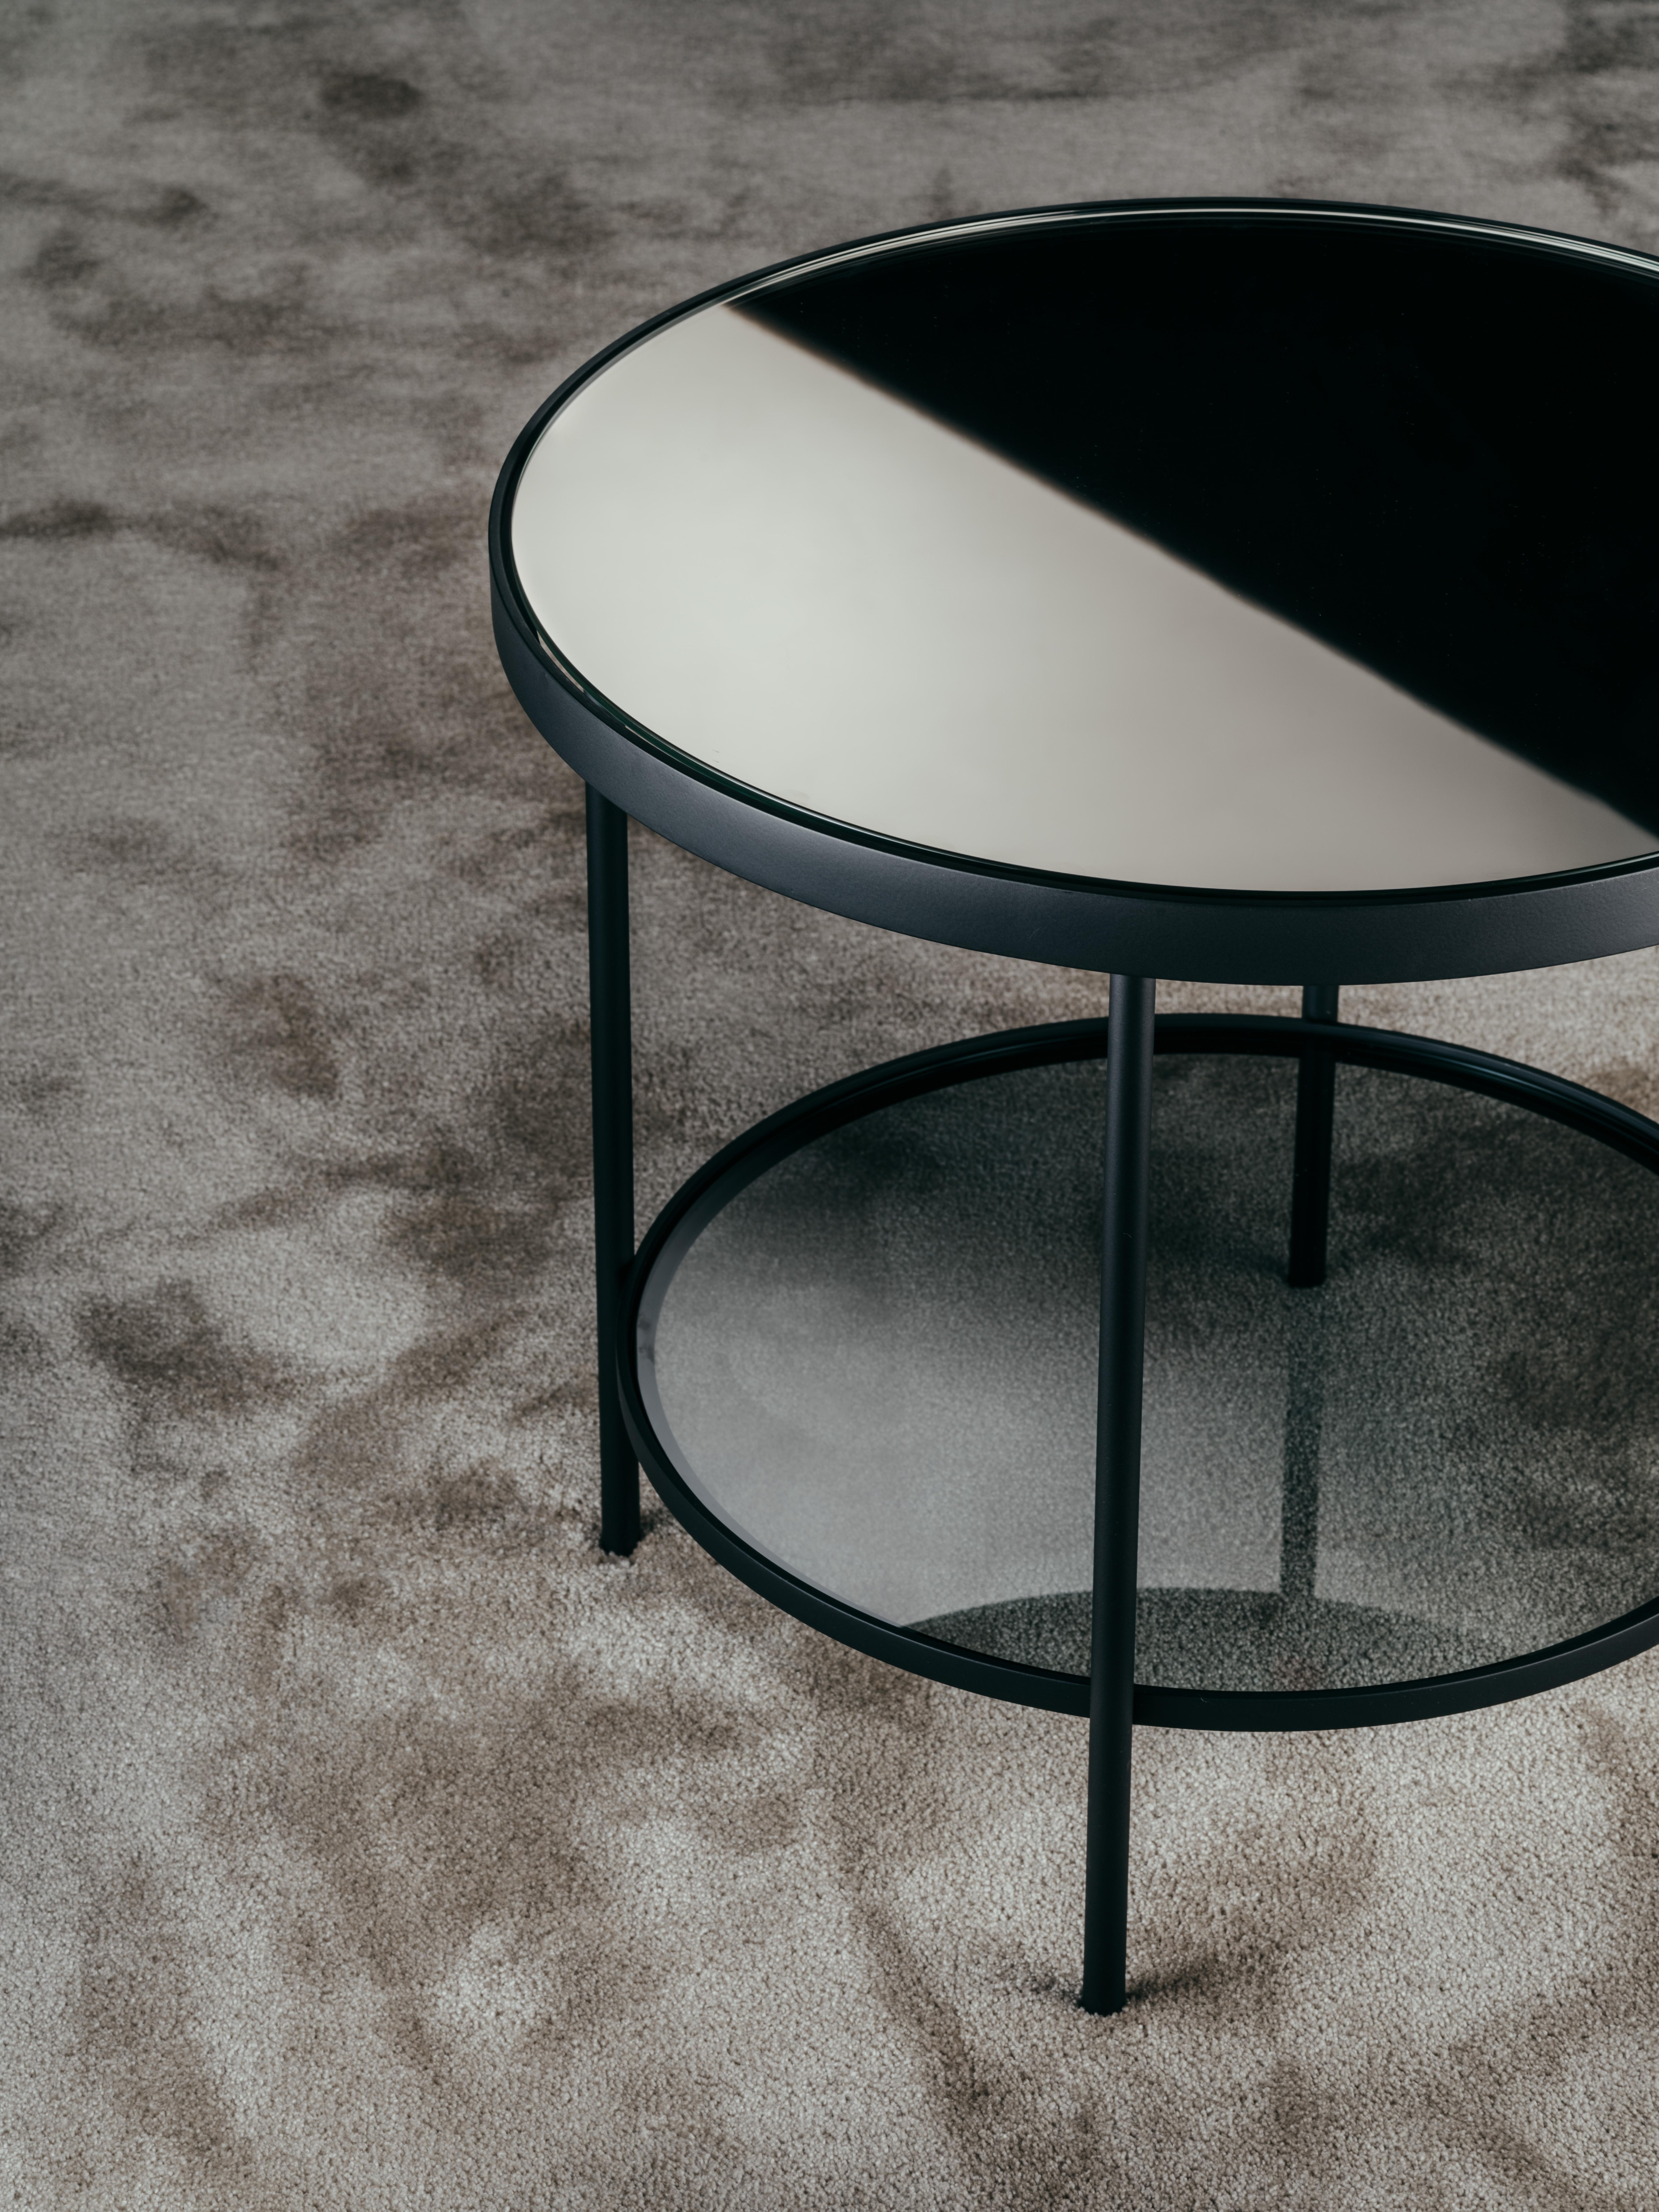 Surround me coffee table is part of the Fleurs DU MAL Capsule Collection.?
Surround me coffee tables are available in two different sizes. They are composed of a circular structure supported by four metal tubular feet. The upper shelf can be in